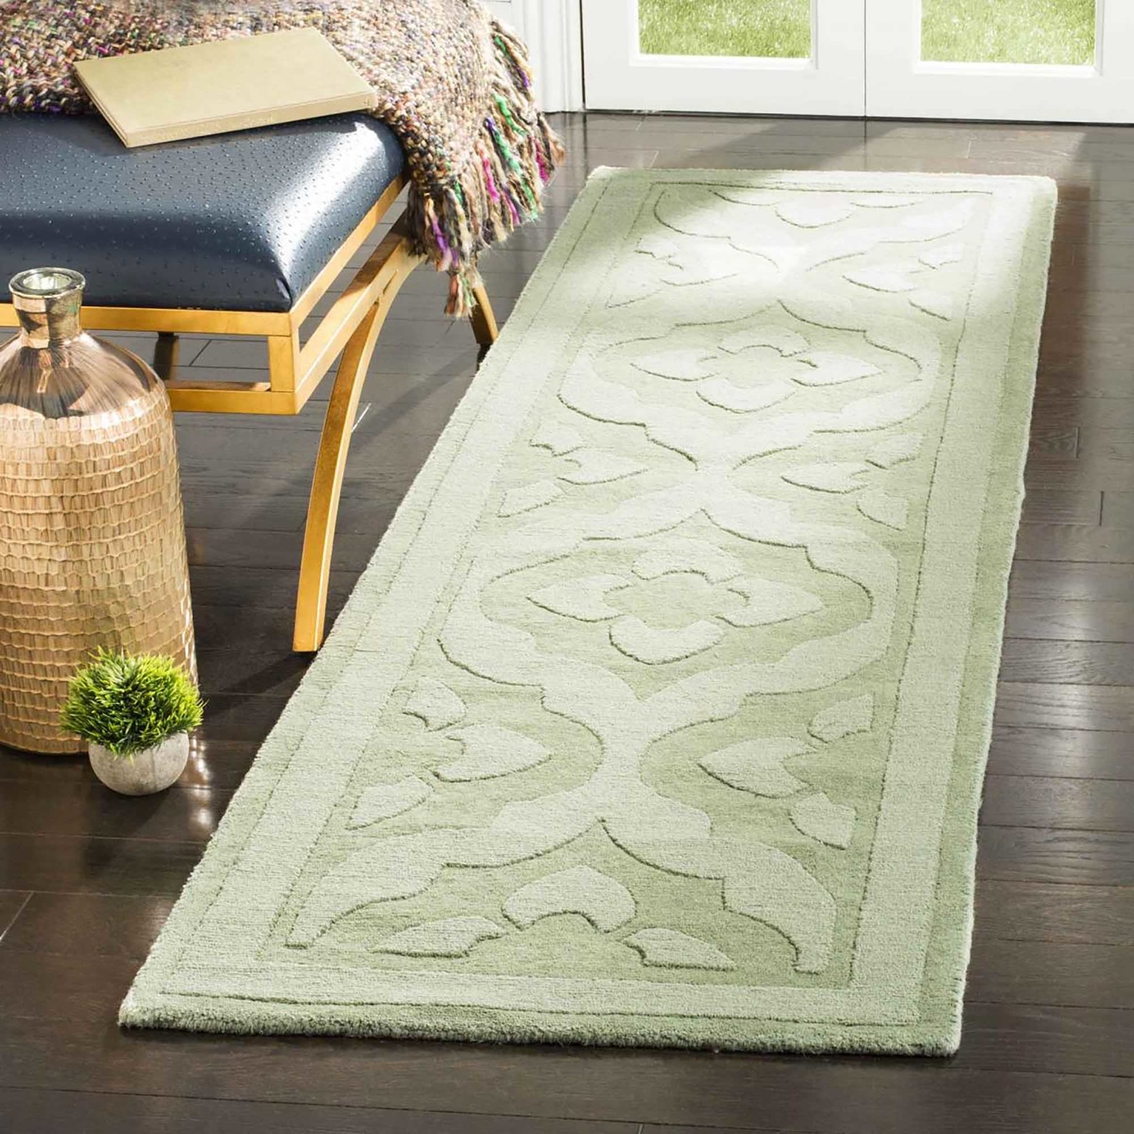 Martha Stewart Collection Casbah Area Rug - Image 2 of 2